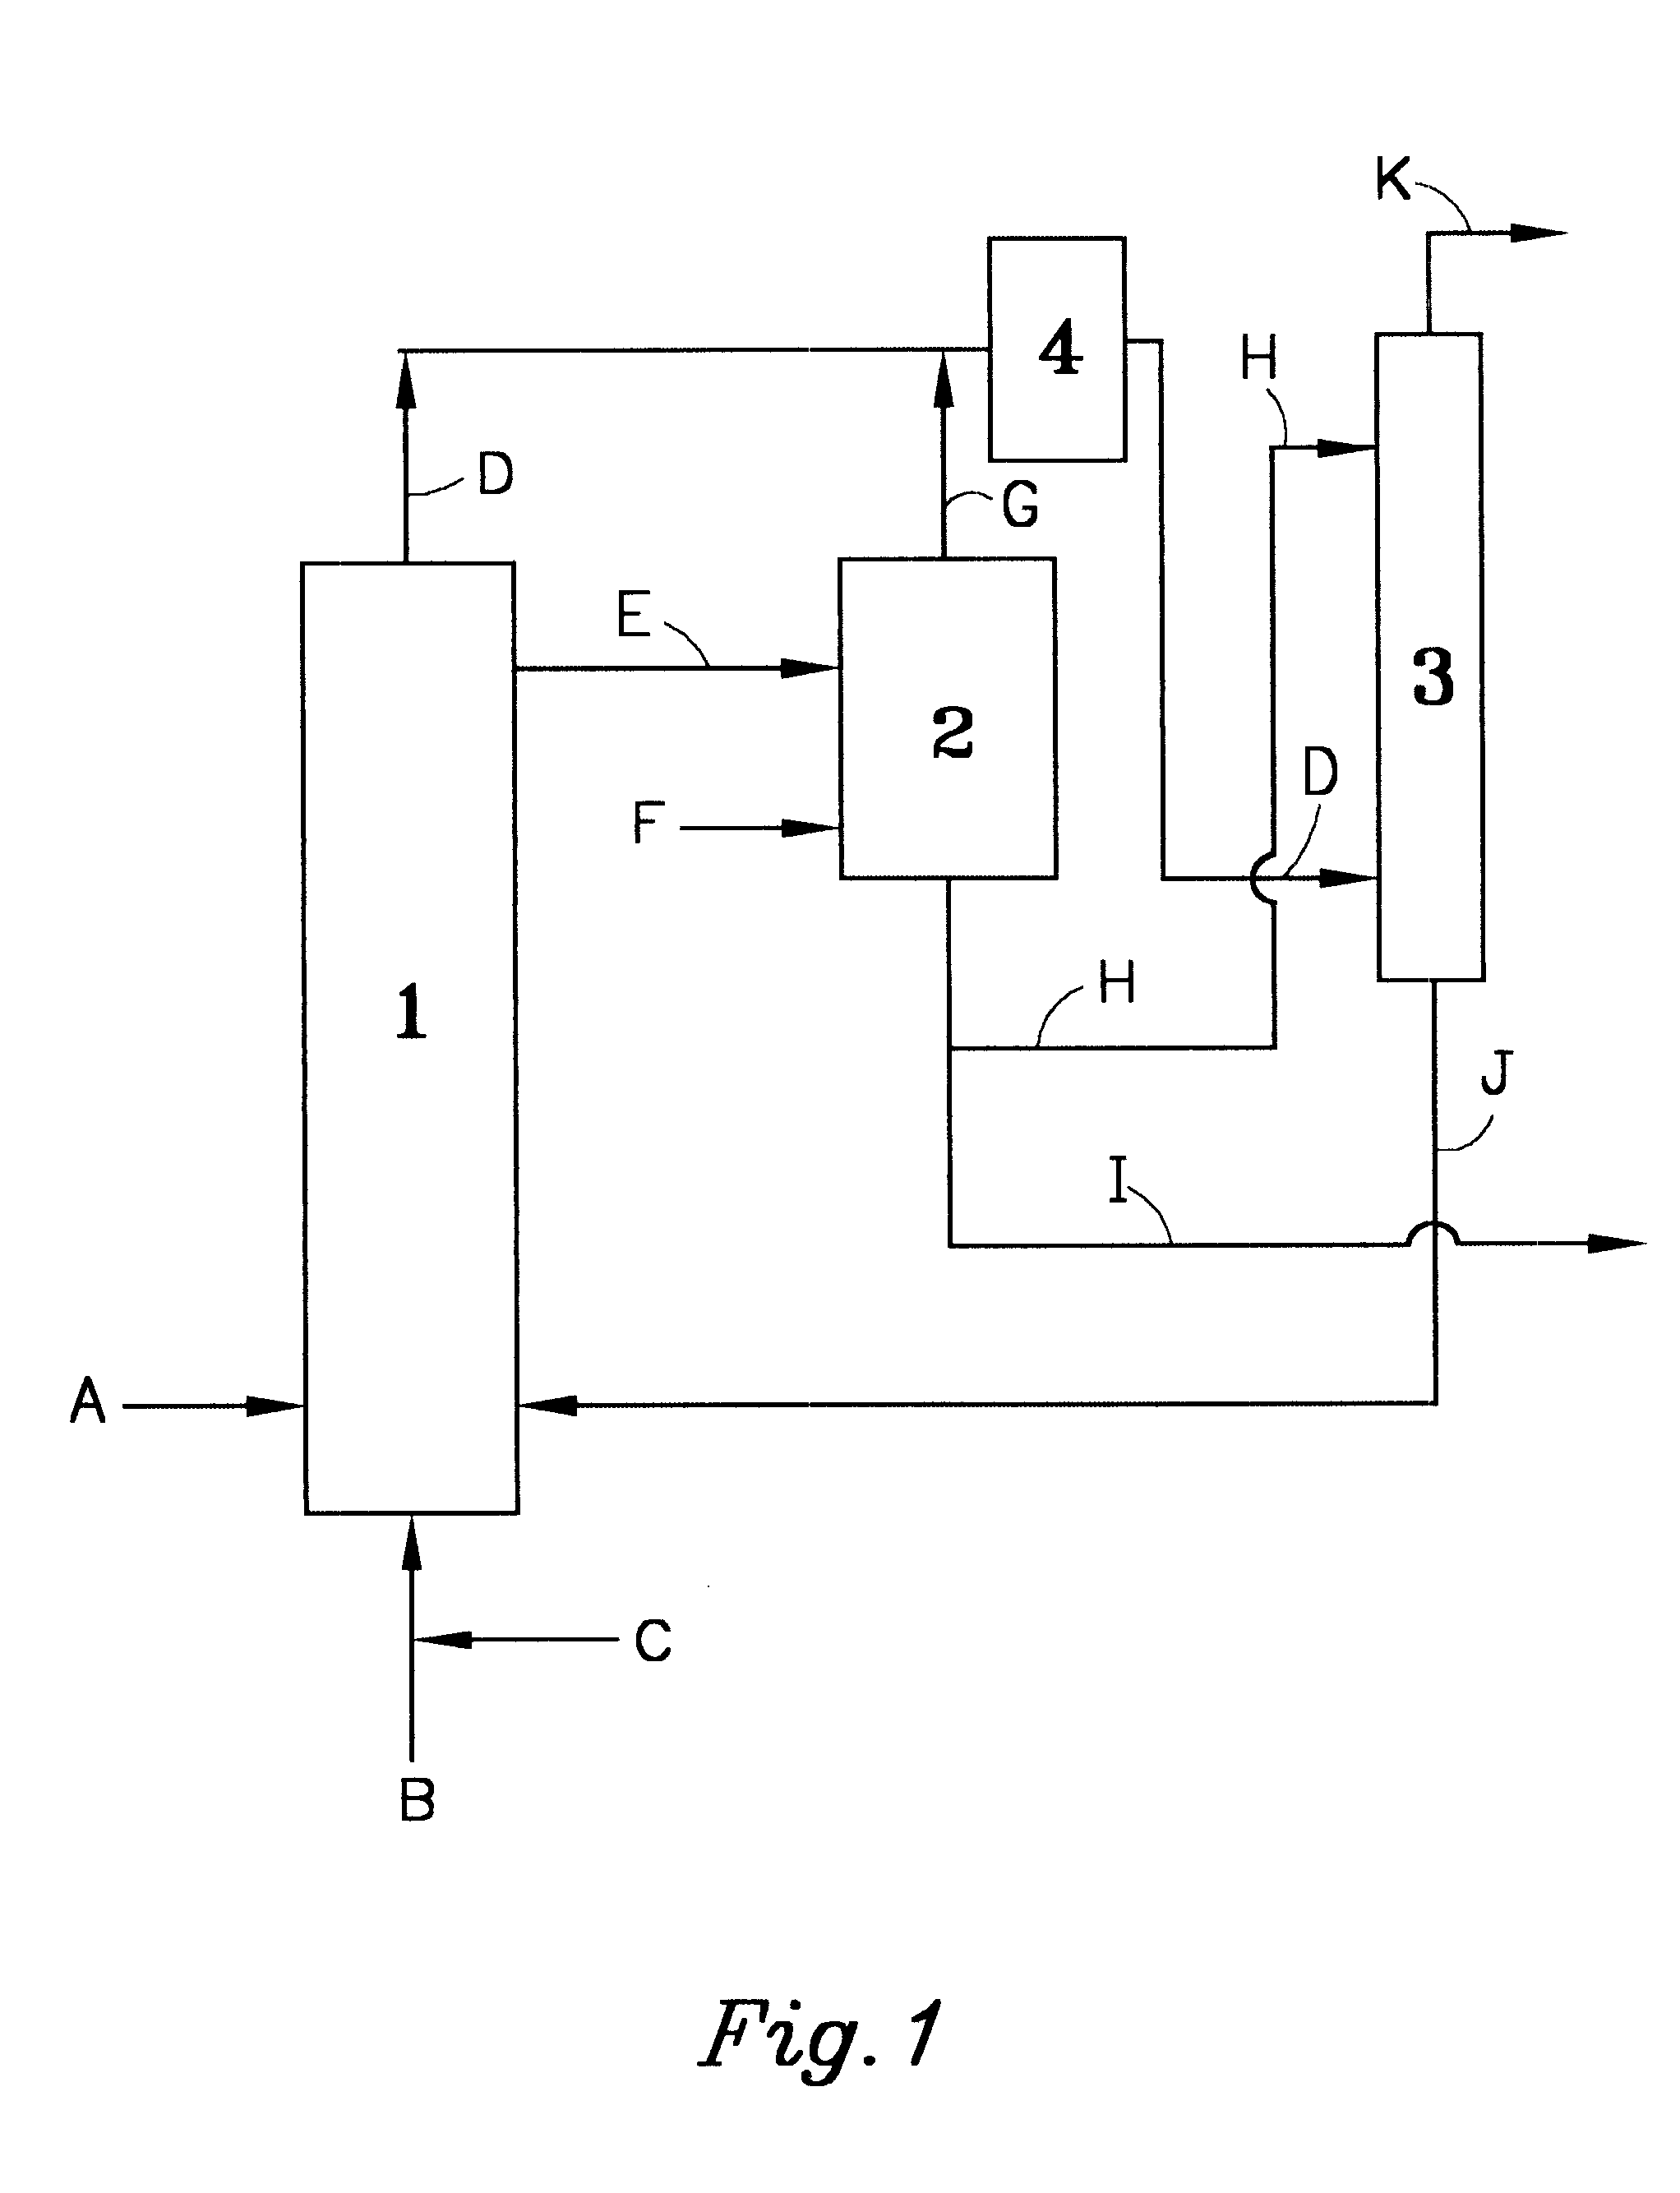 Process for producing dimethyl sulfoxide